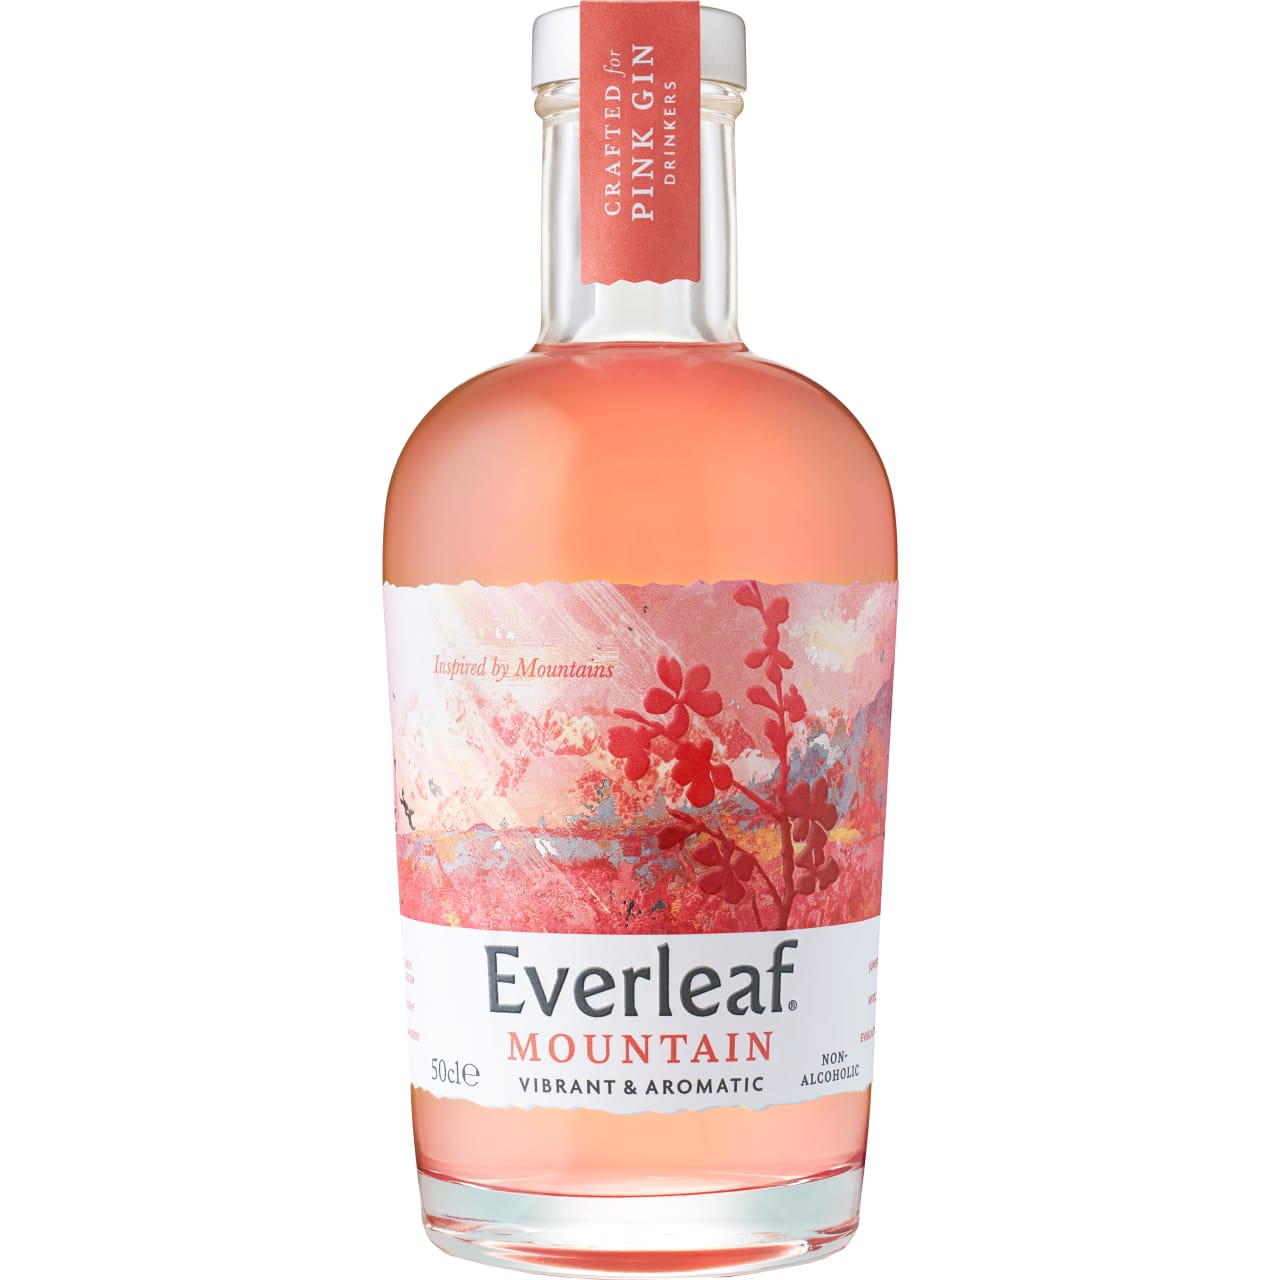 Everleaf mountain is a non-alcoholic aperitif that is a blend of 12 sustainbly sourced botanicals including rosehip, strawberry and cherry blossom.